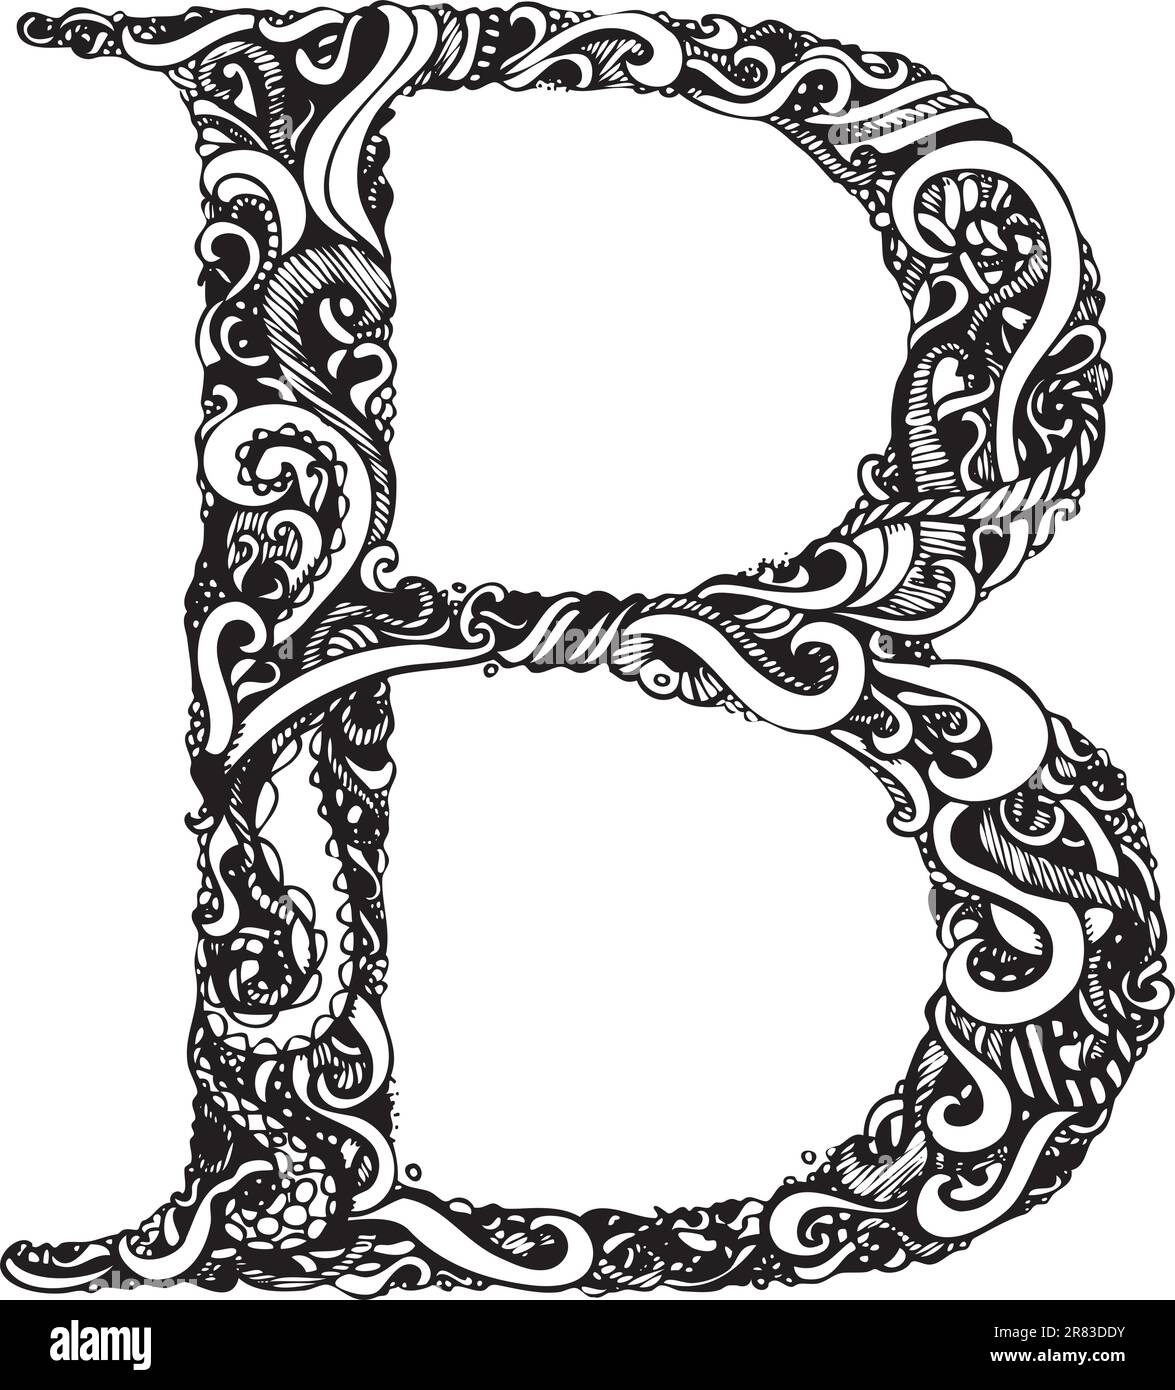 Capital Letter B - Calligraphic Vintage Swirly Style / Hand Drawn / One Element - Color Change Easy / Vector Stock Vector